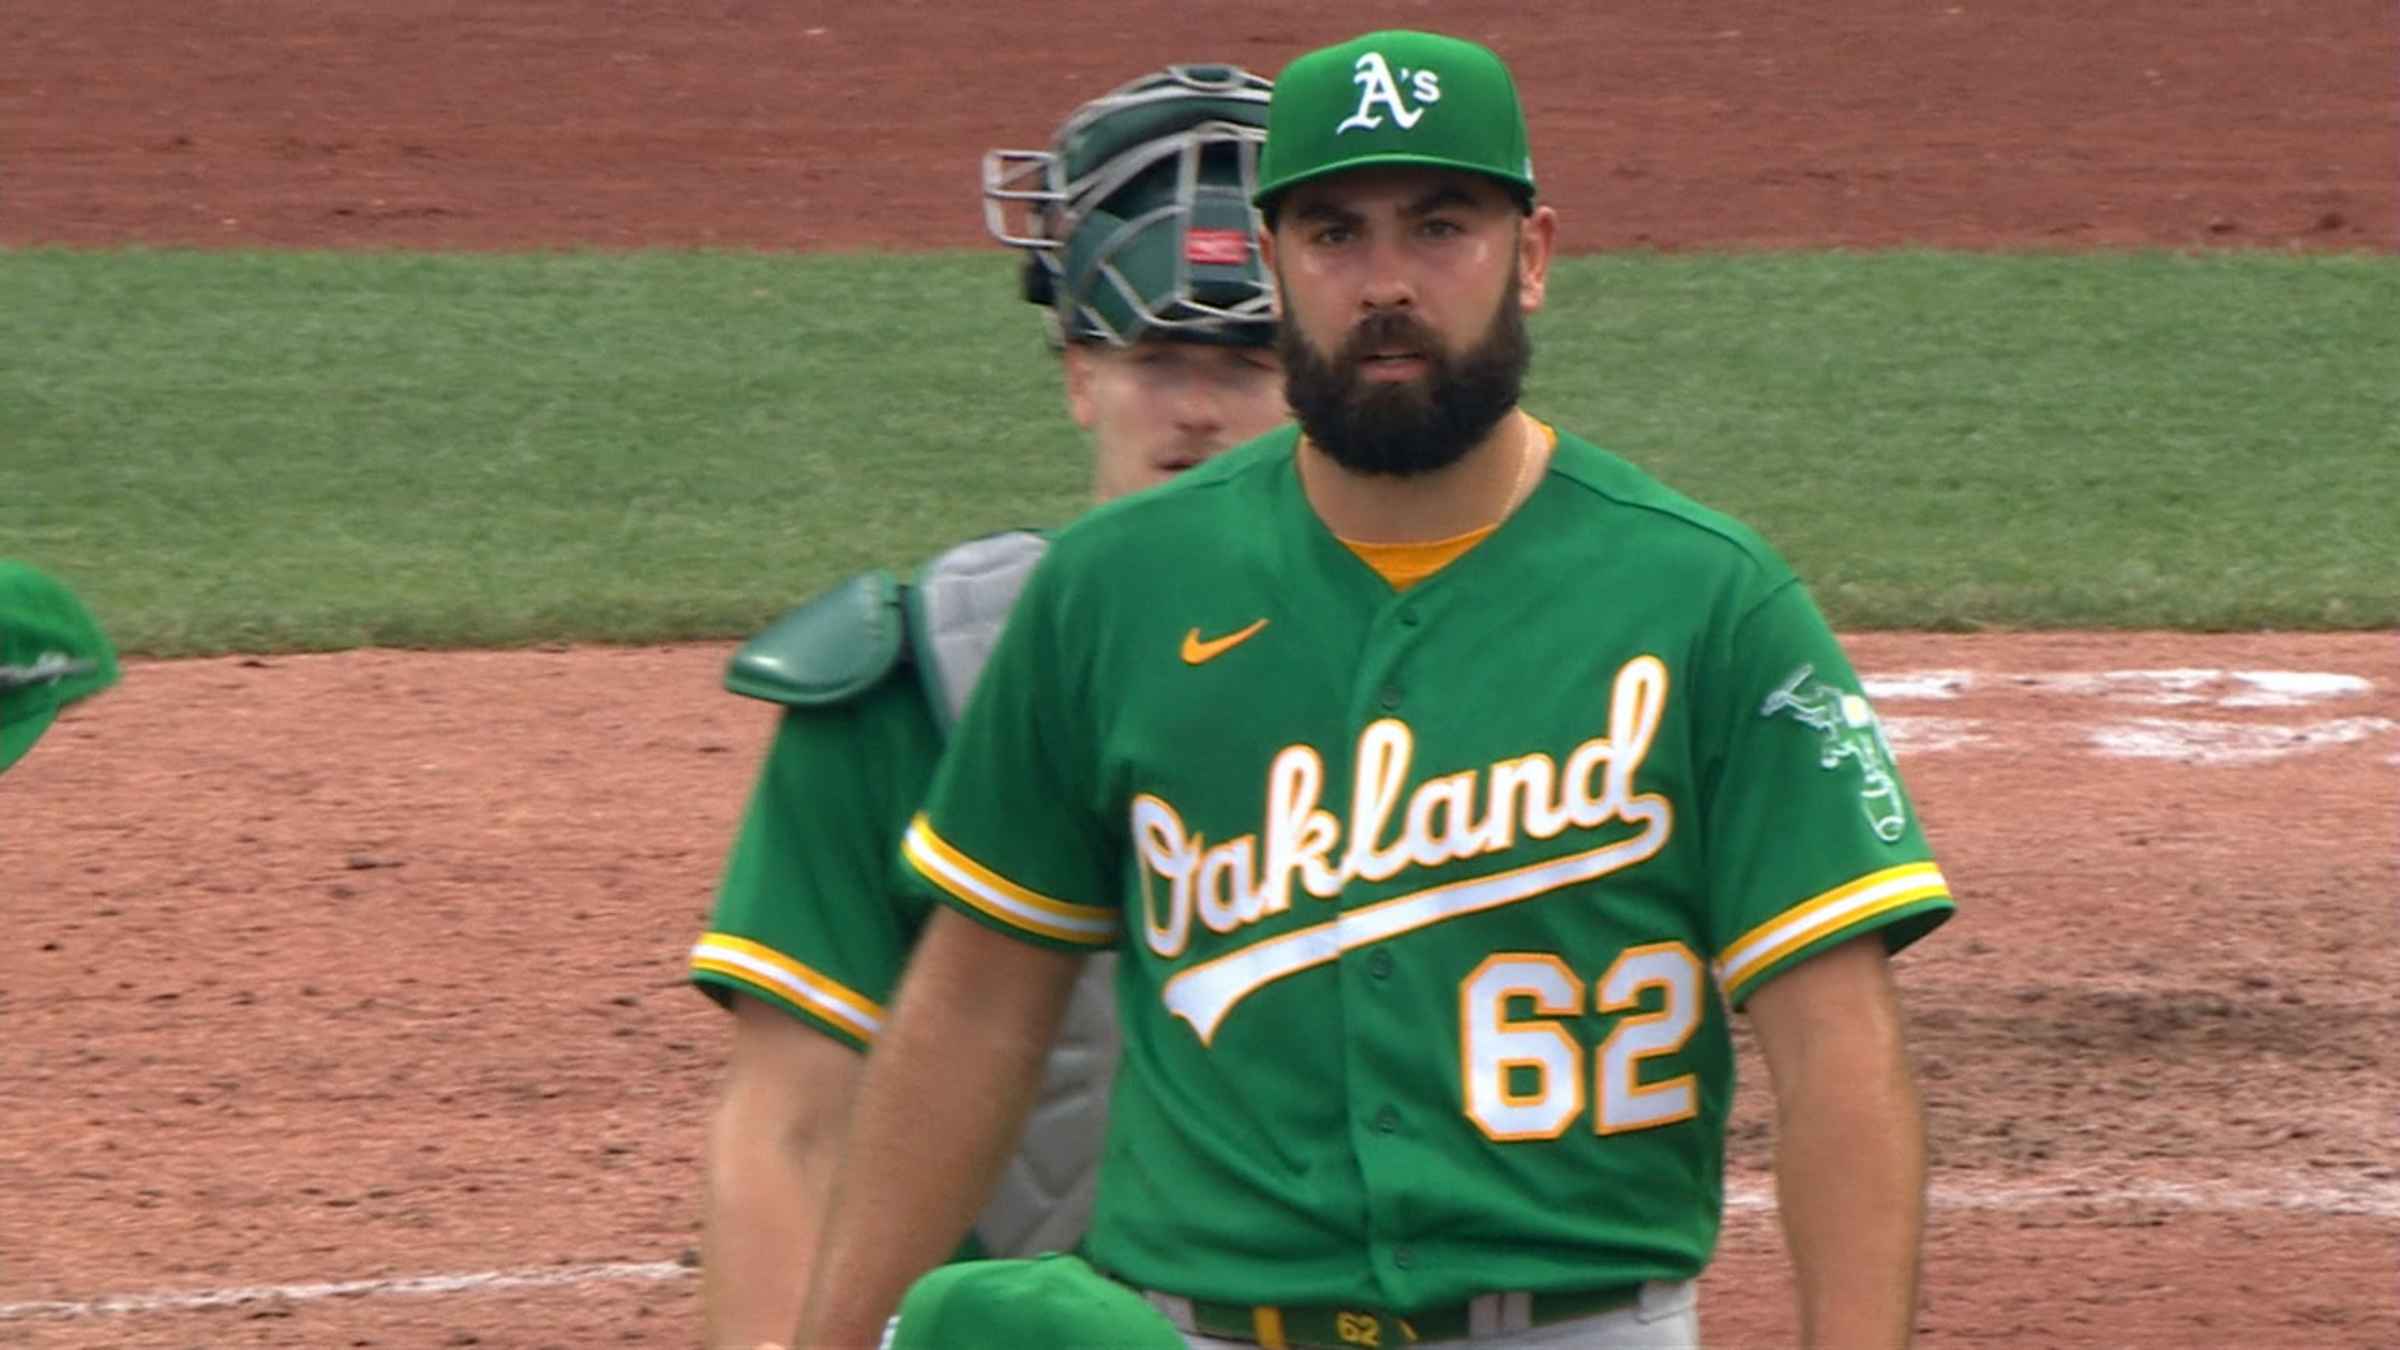 Lou Trivino had priceless reaction after A's lose on misplayed ball